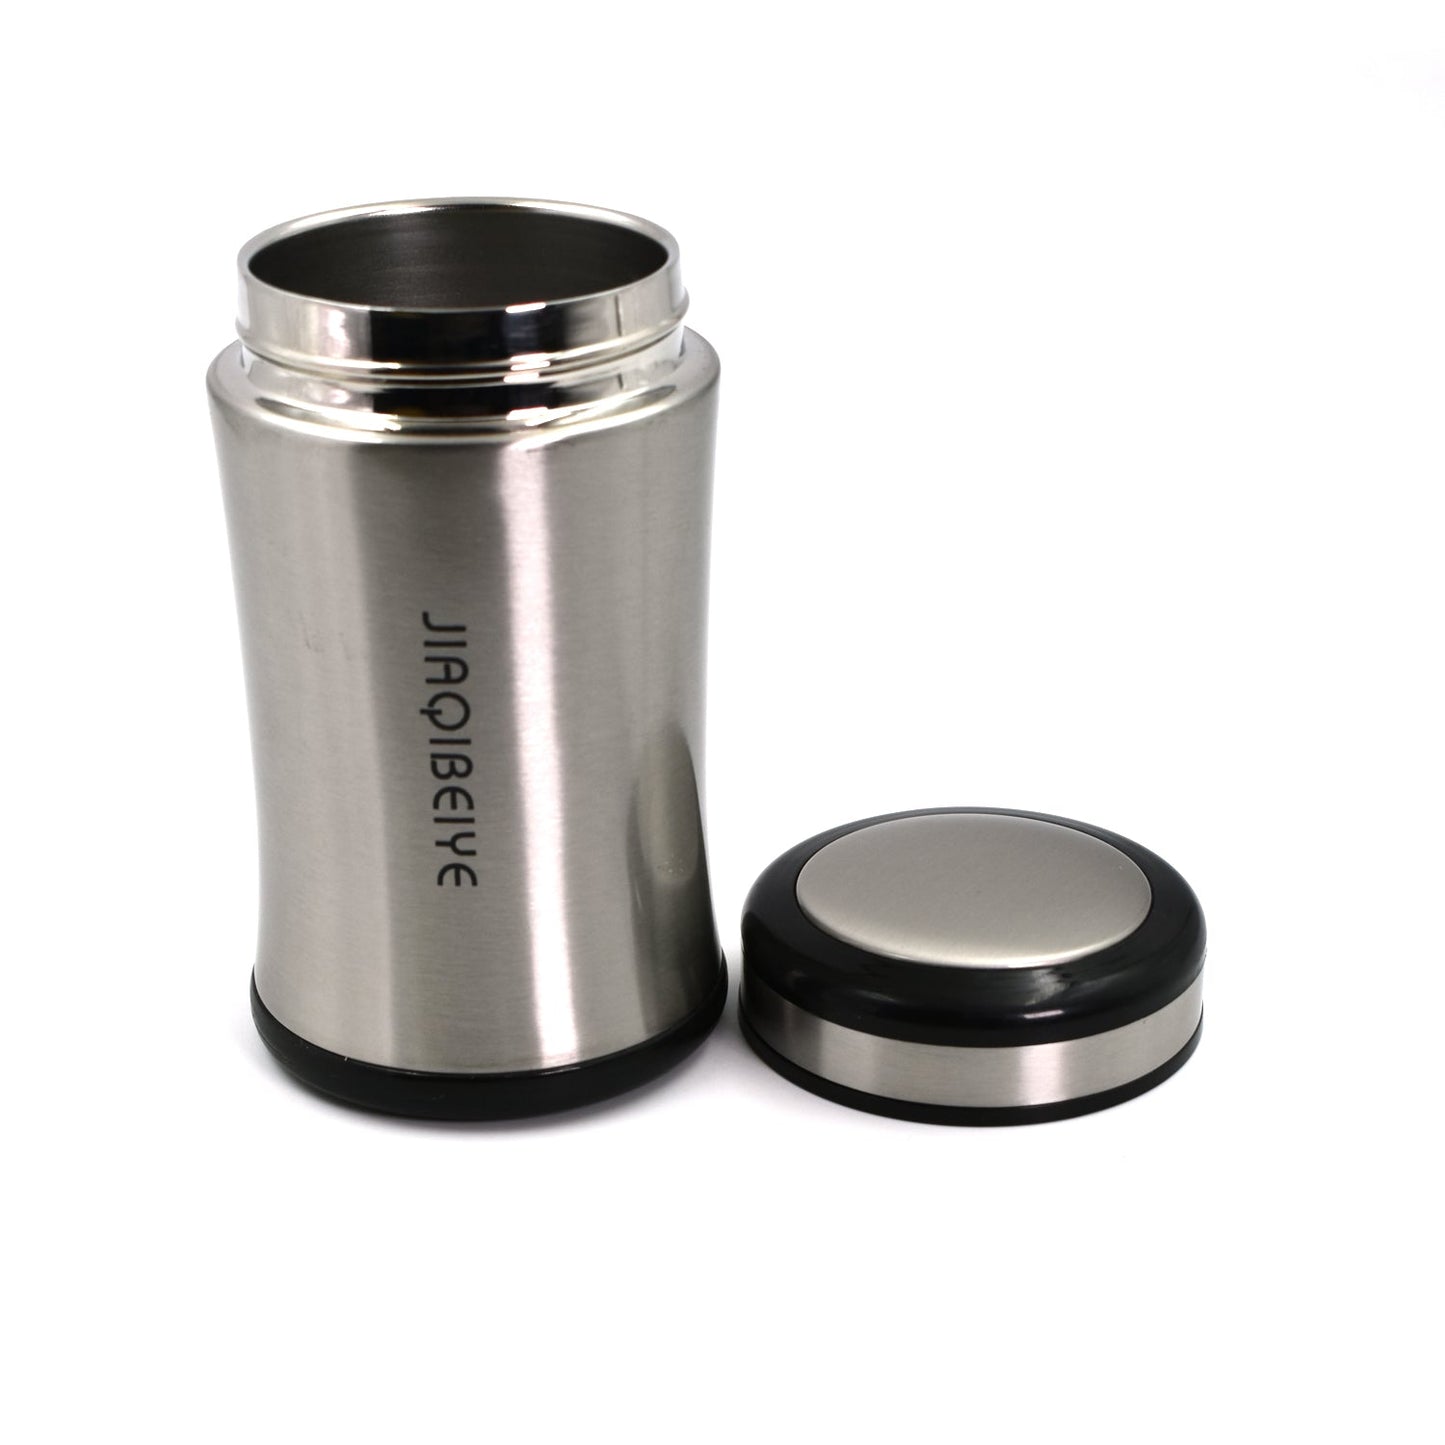 6420 Stainless steel Bottles 300Ml Approx. For Storing Water And Some Other Types Of Beverages Etc. 